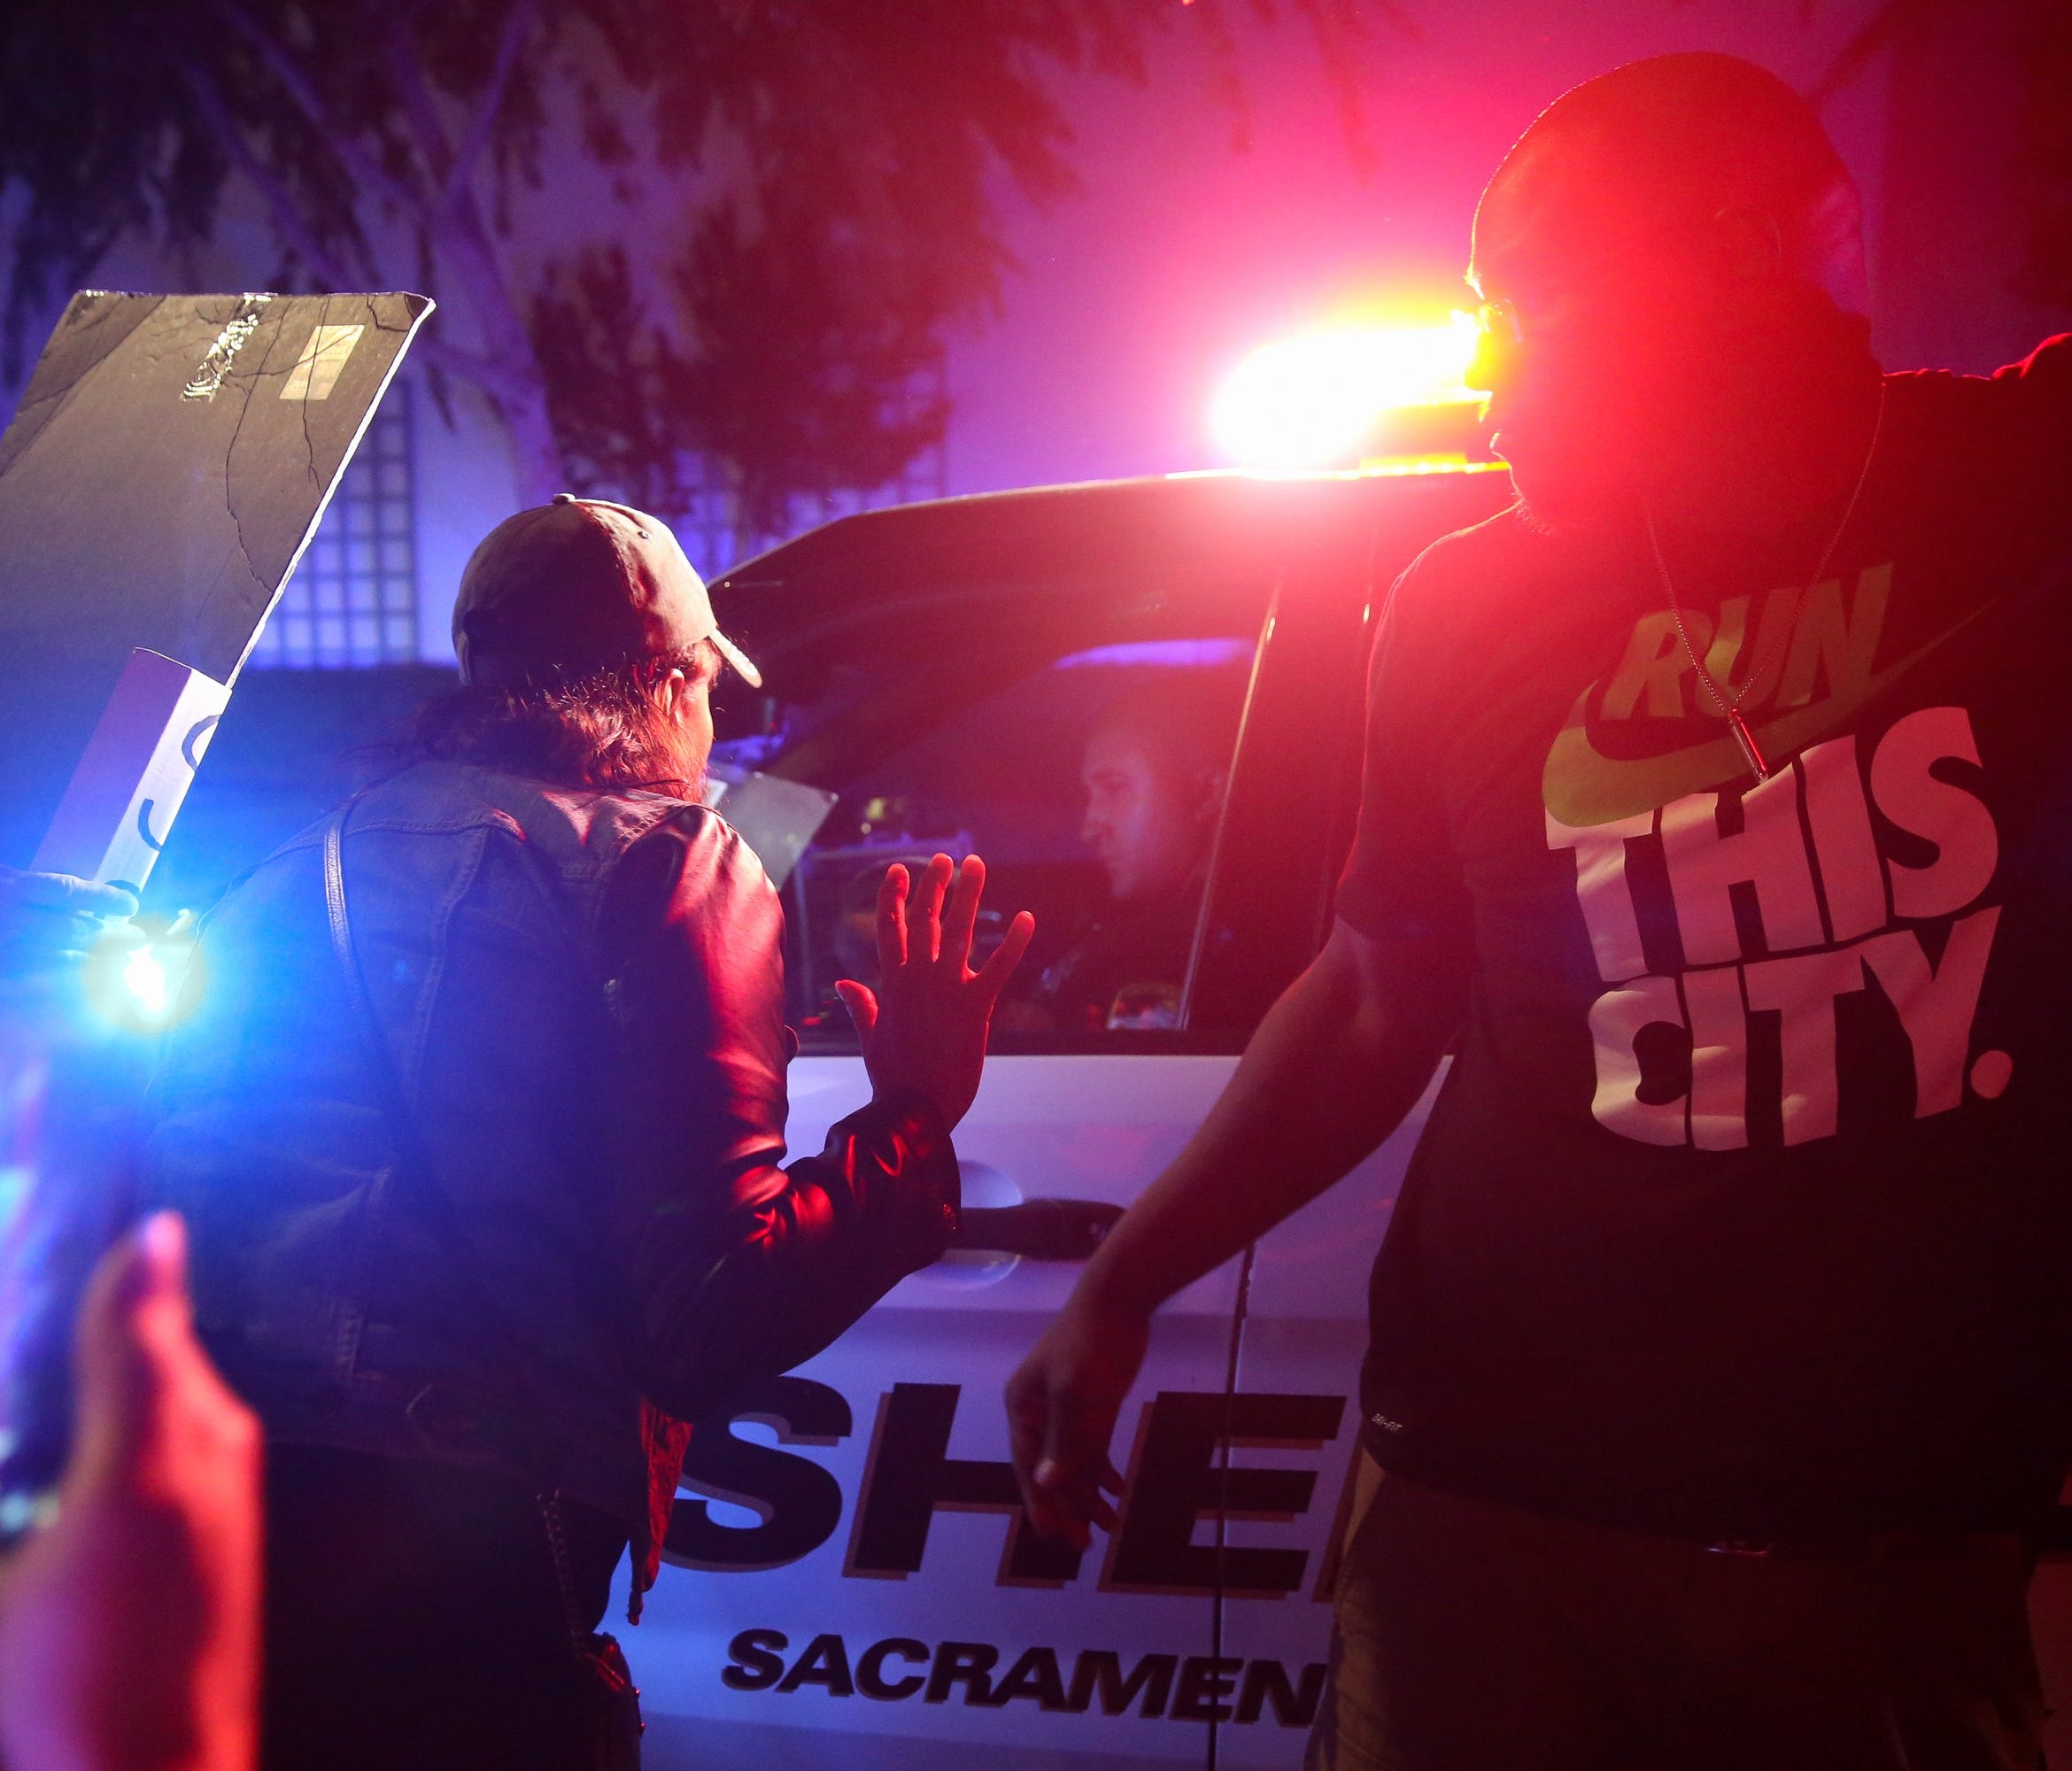 Protesters confront law enforcement officers in the street after a woman was struck by a Sacramento Sheriff's Department vehicle.